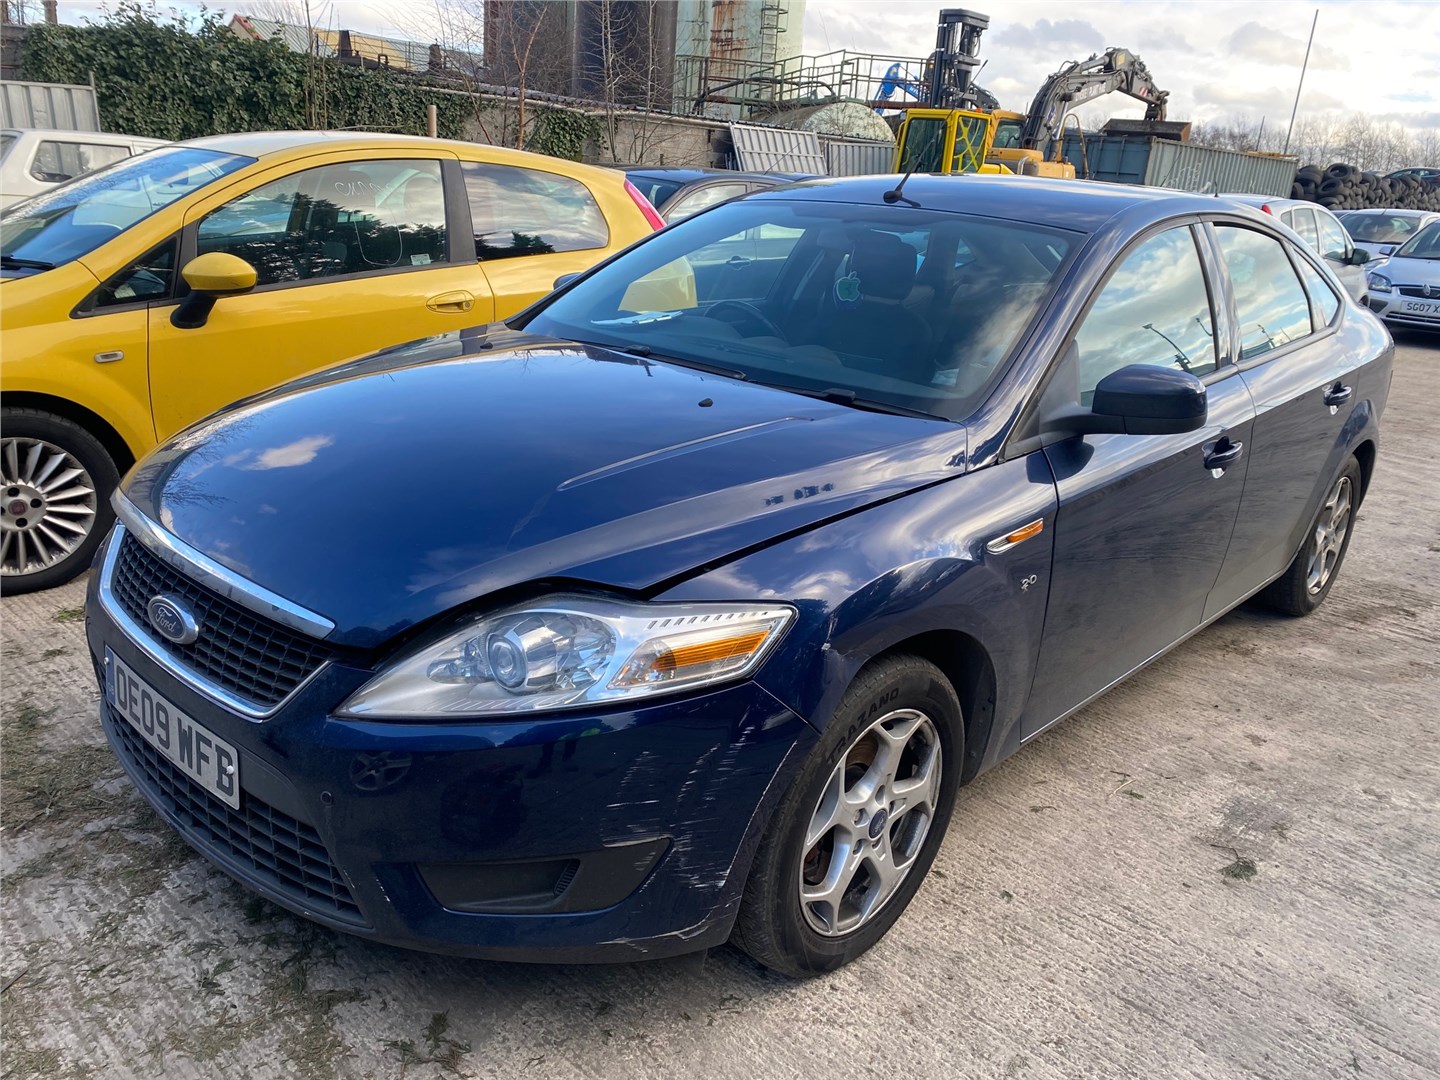 6G916K683A Патрубок интеркулера Ford Mondeo 4 2007-2015 2009